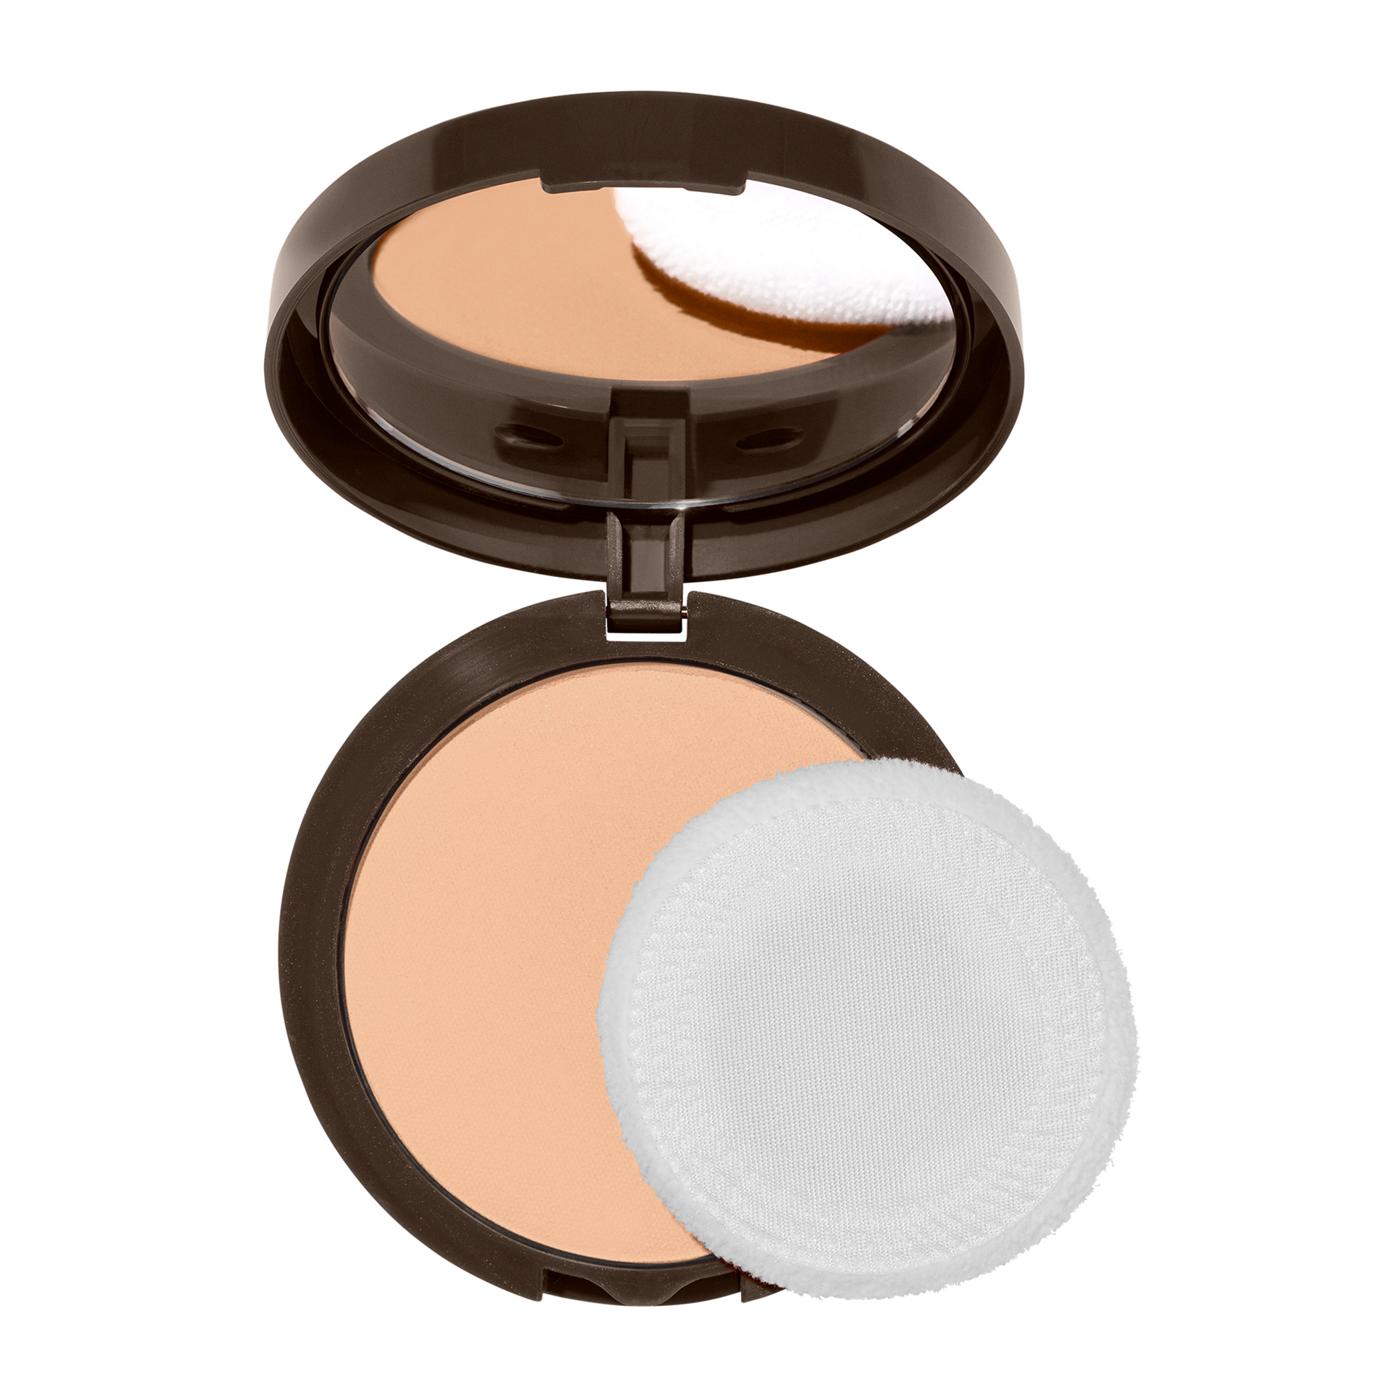 Covergirl Clean Invisible Pressed Powder - Buff Beige; image 8 of 15